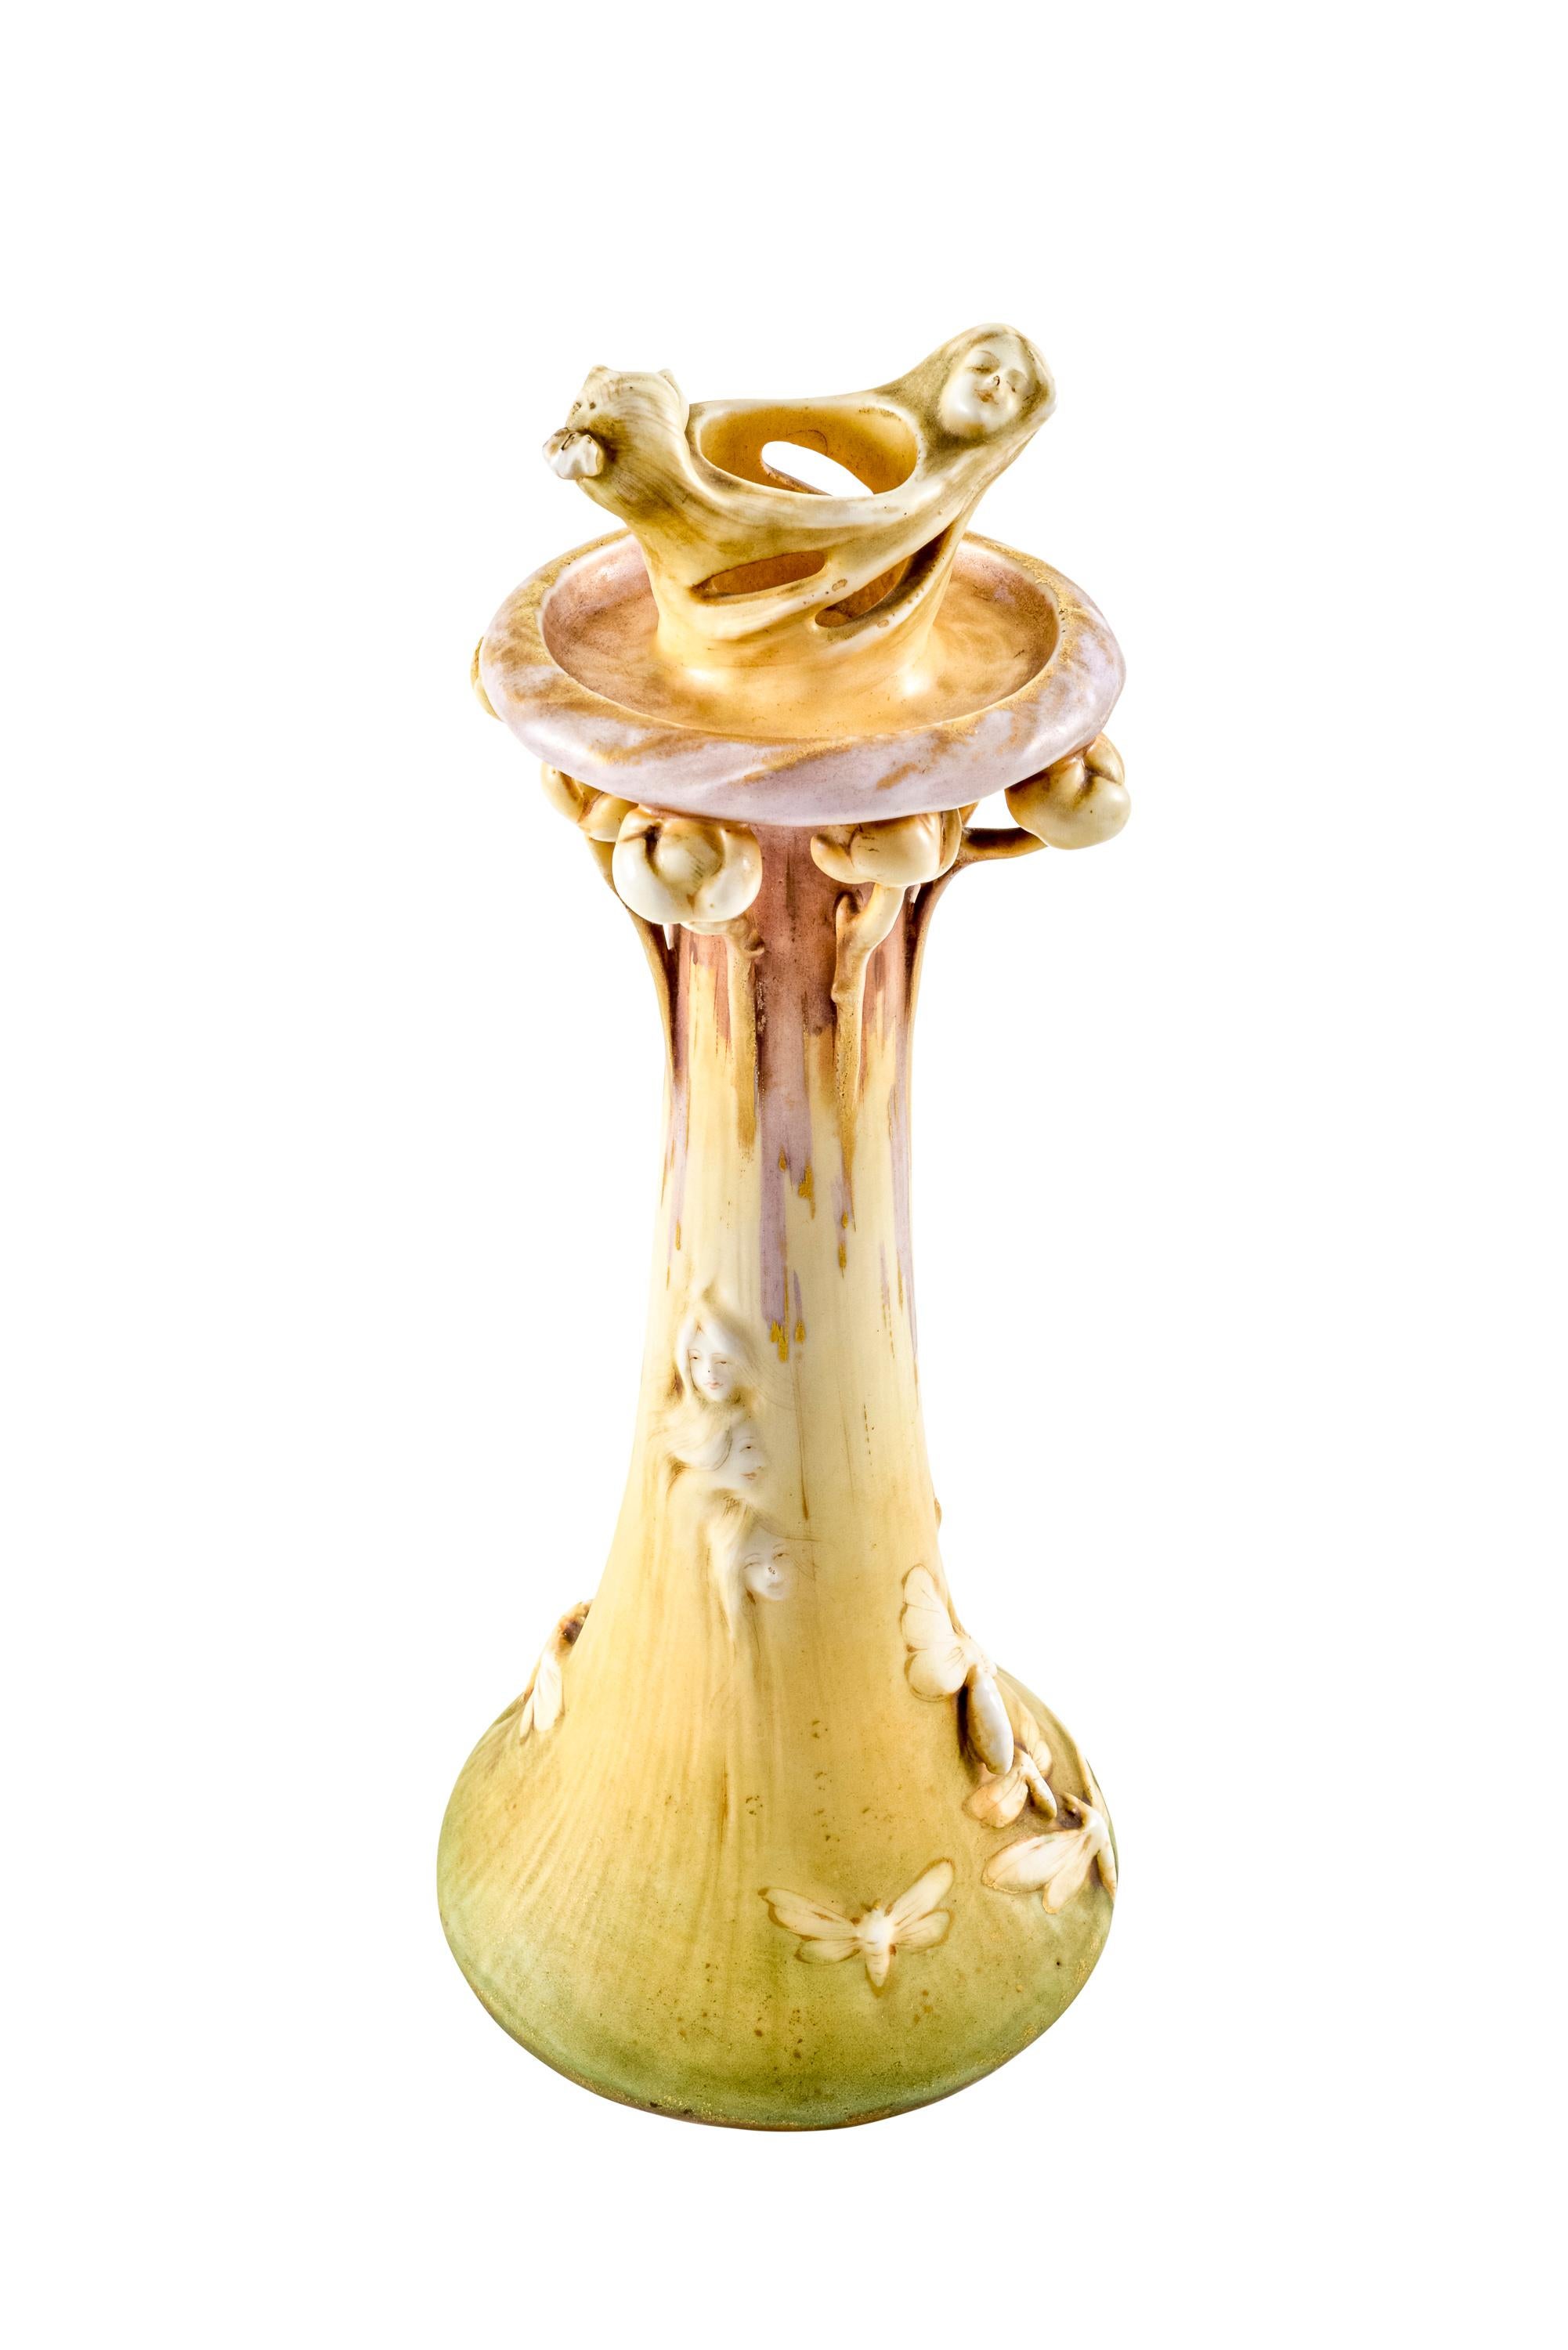 Symbolist Art Nouveau candlestick designed by Eduard Stellmacher manufactured by Amphora-Werke Riessner Stellmacher & Kessel Turn-Teplitz Bohemia, circa 1902

The candlestick exemplifies the unique features of ivory porcelain from the house of